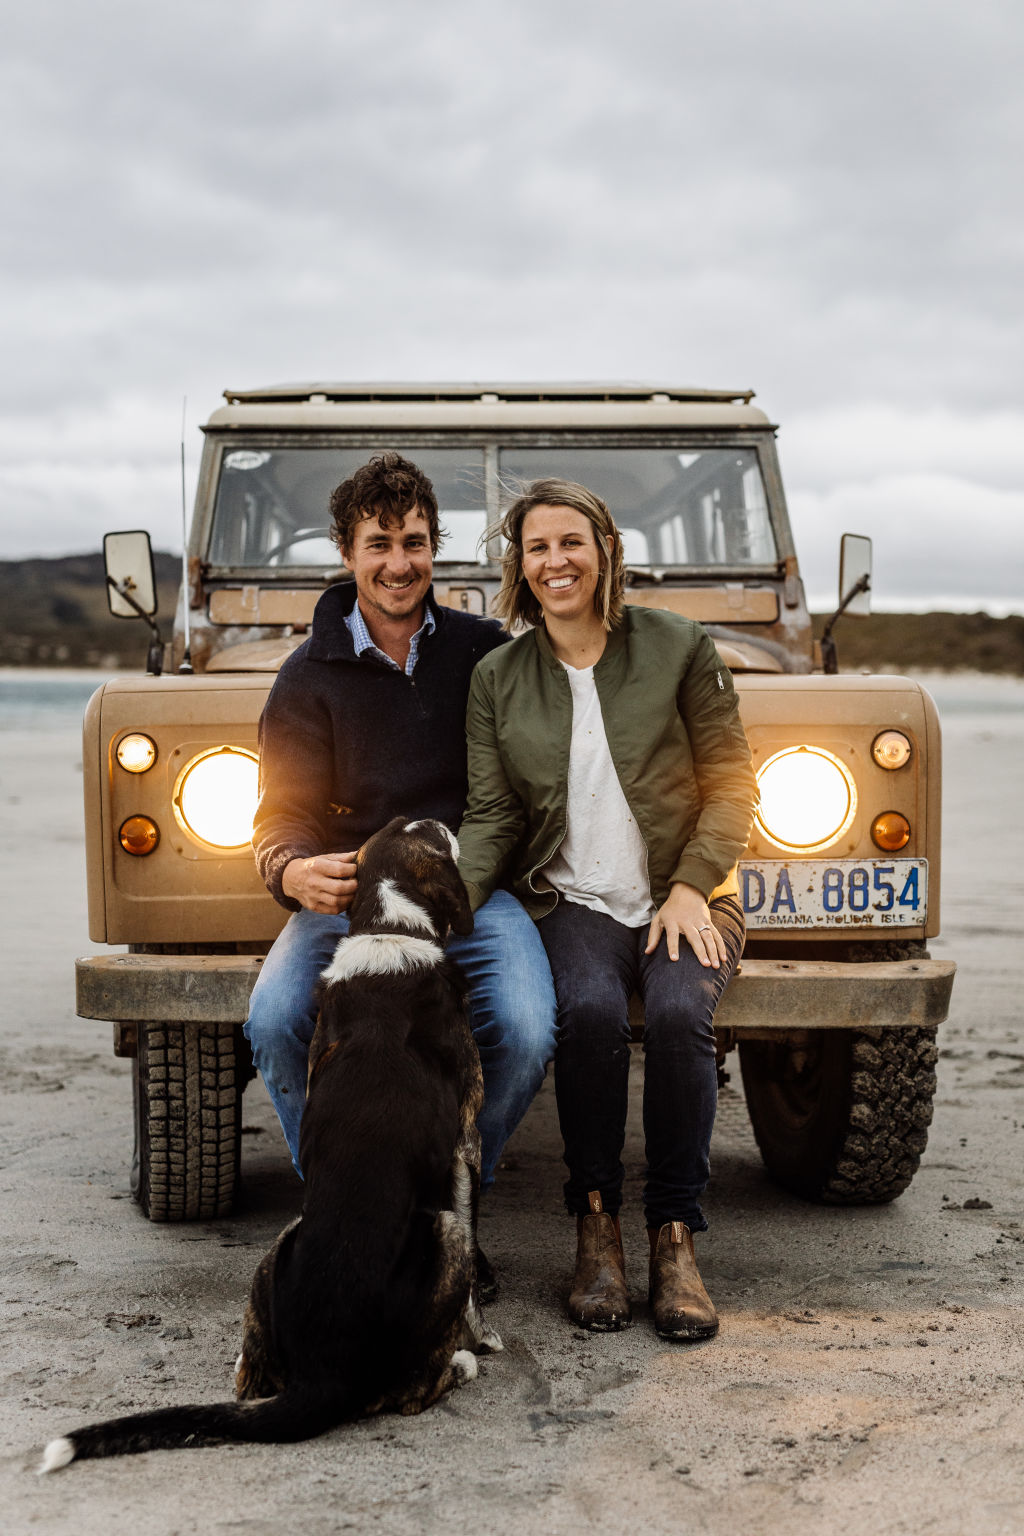 The isolation, the quiet roads, crystal clear beaches and small community has never stopped charming the couple, who are now parents to three young children. Photo: Supplied